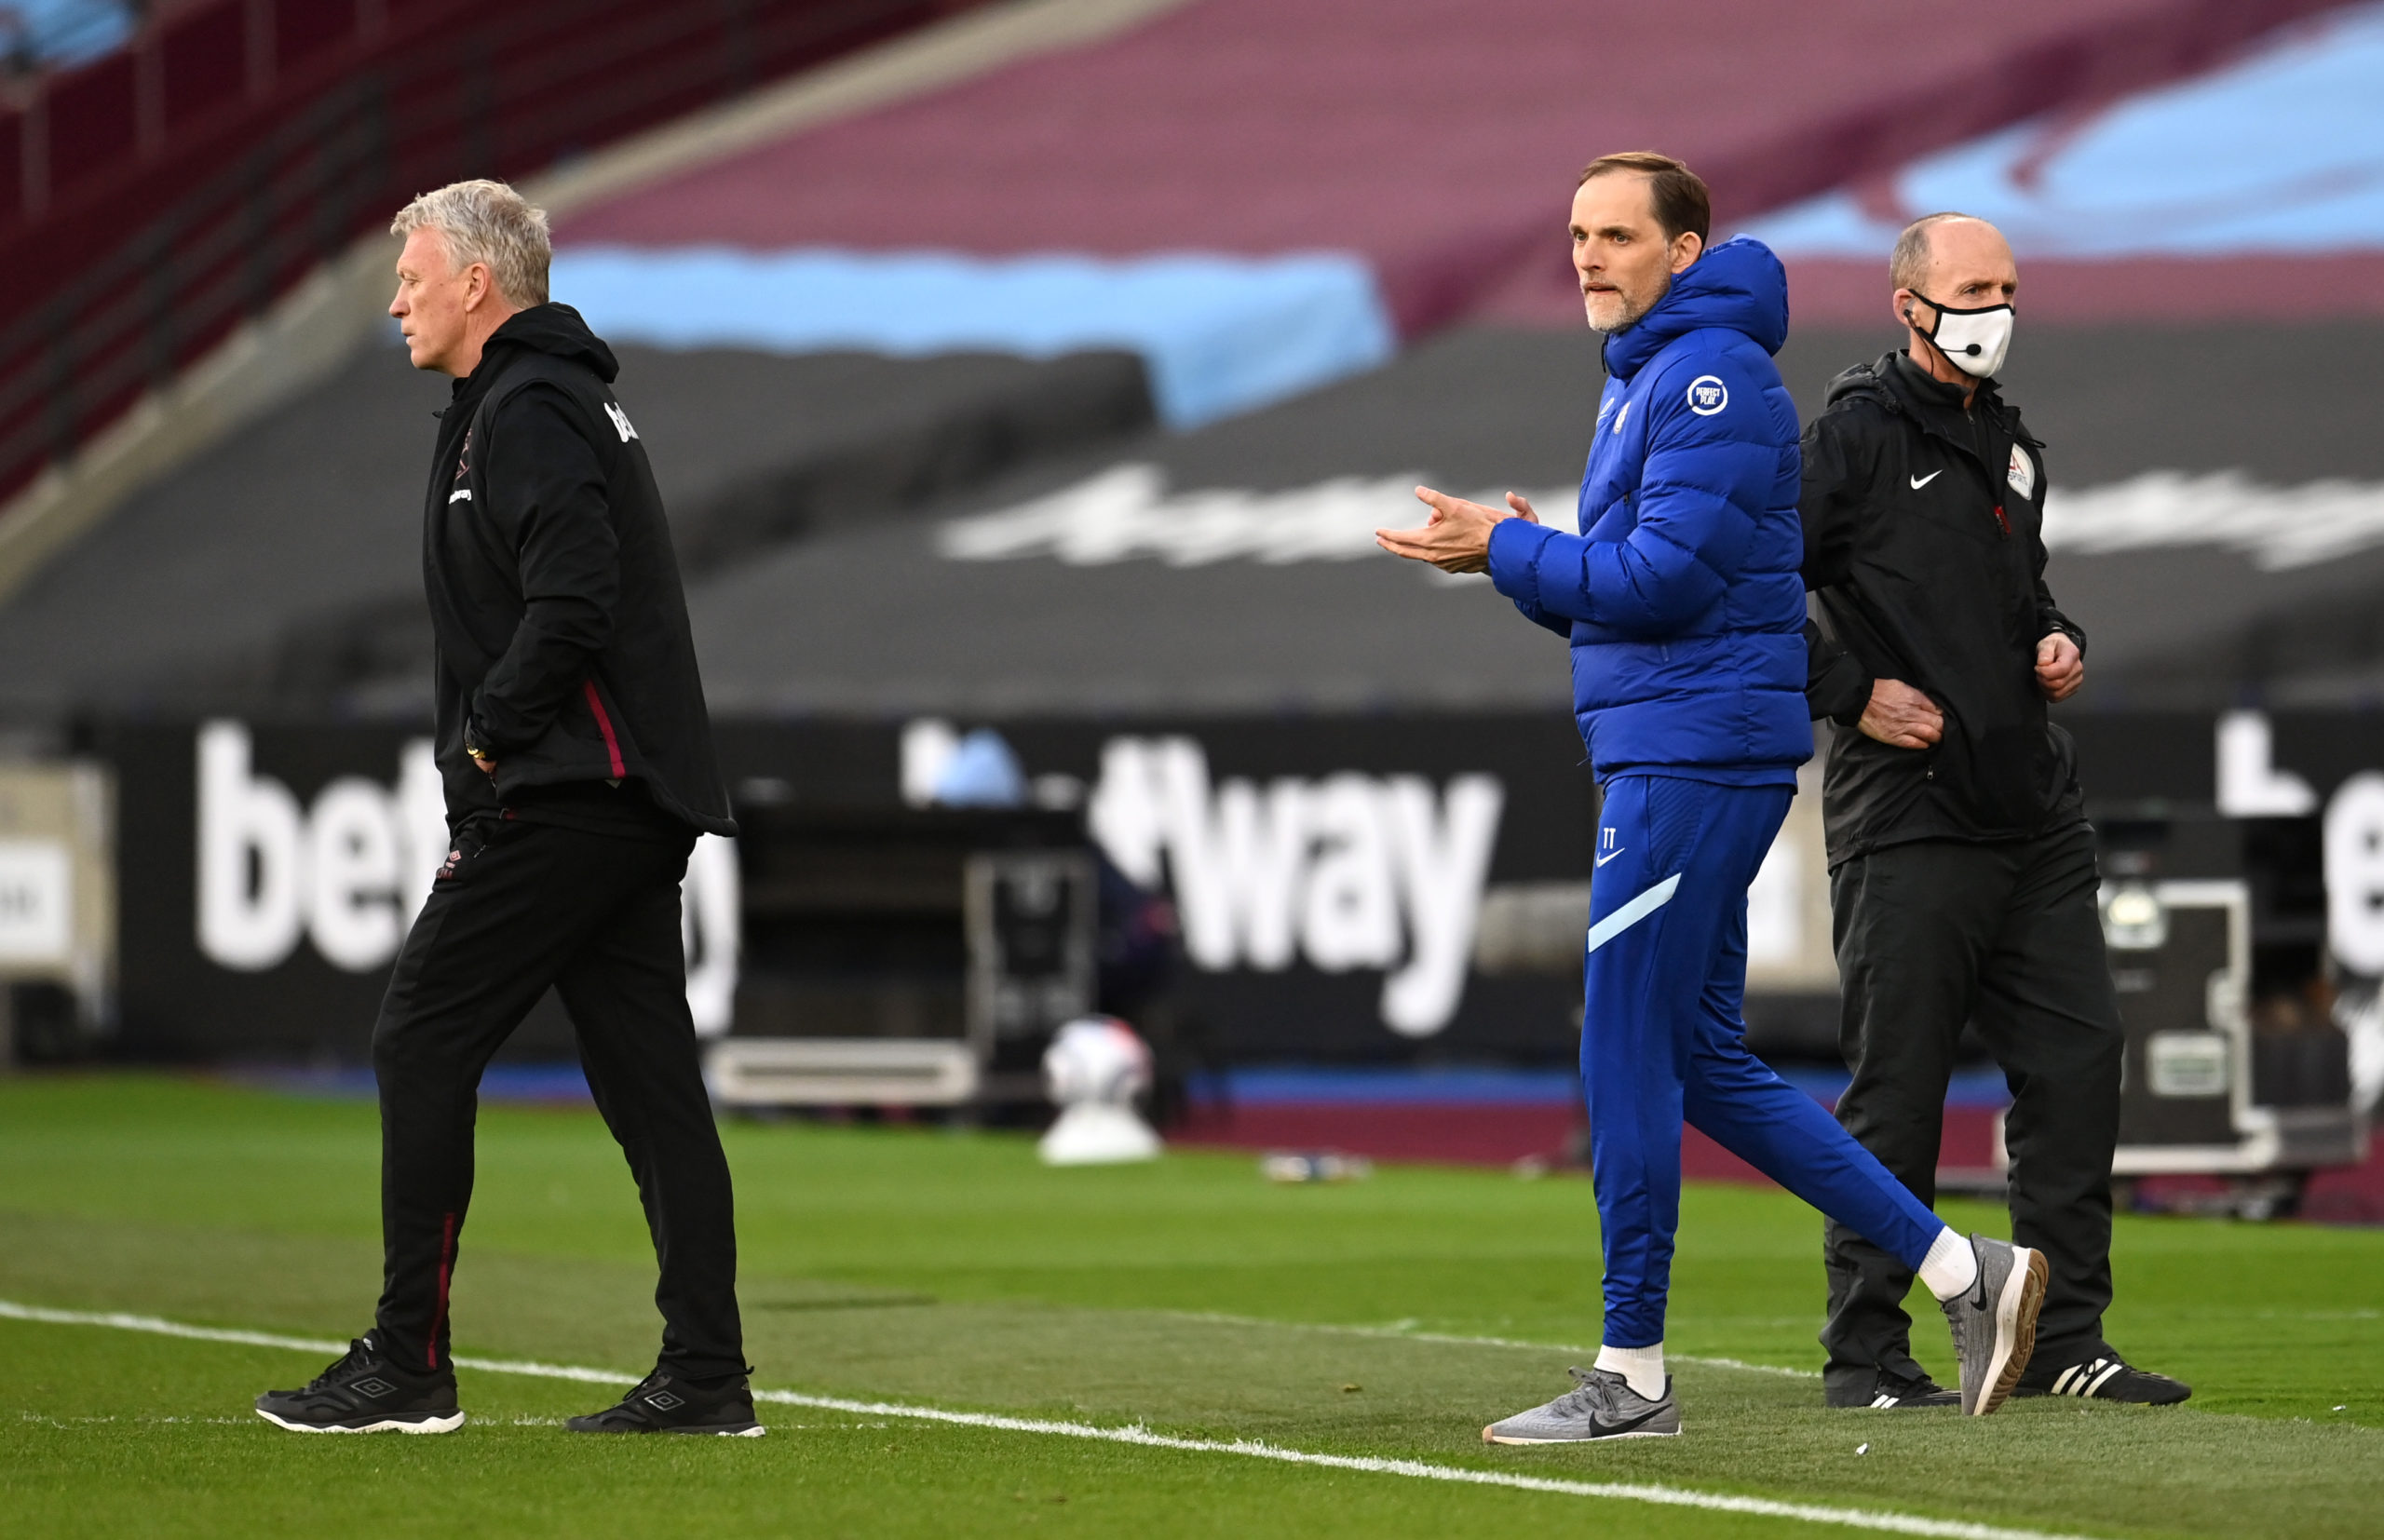 West Ham starting lineup vs Chelsea confirmed; David Moyes makes 6 changes and switches up formation